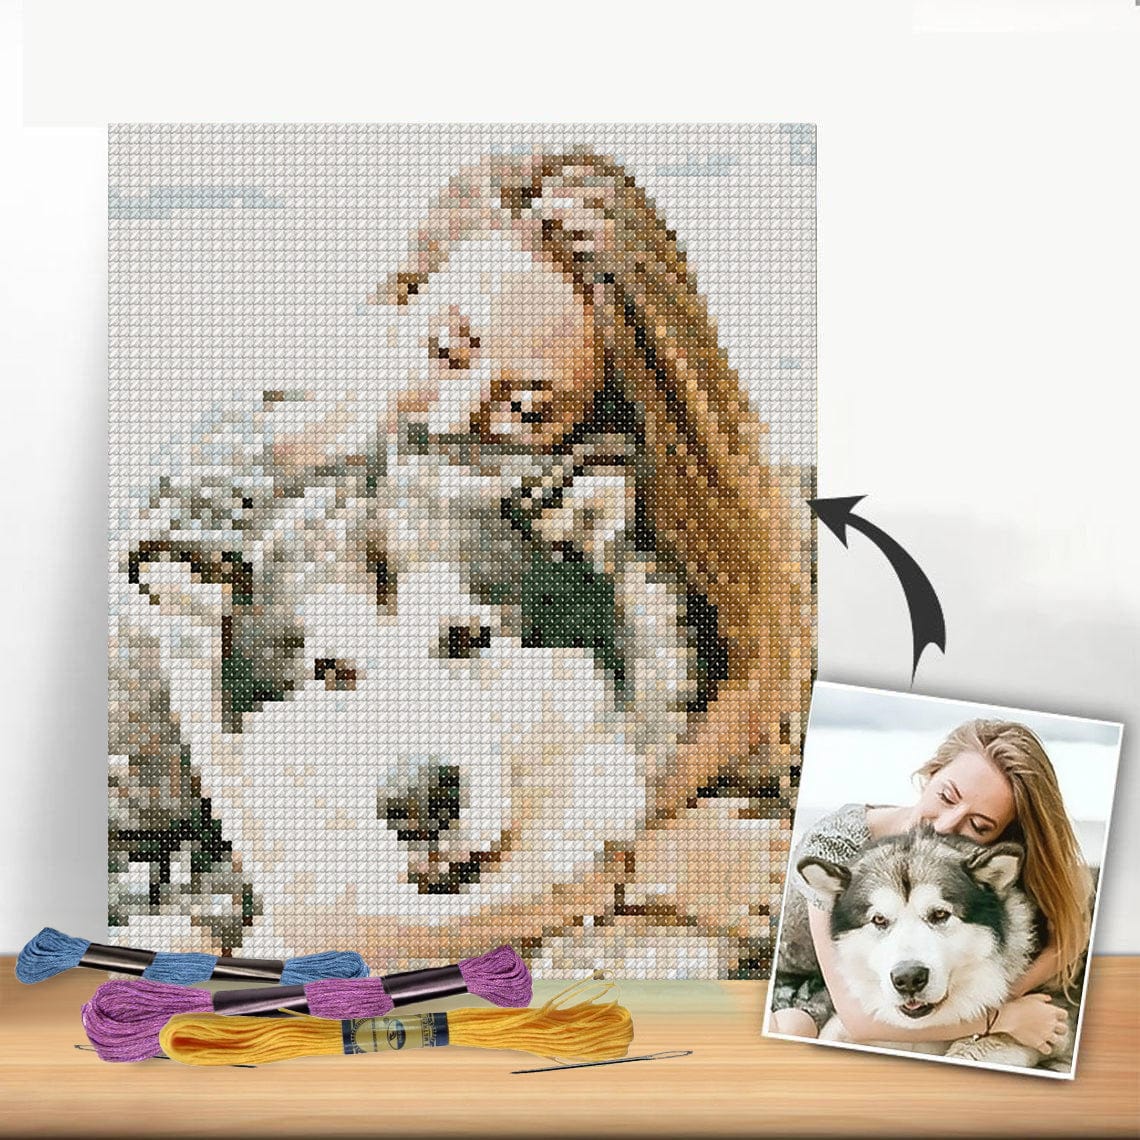 Cross Stitch | Basset Hound - Brown And White Short Coated Dog On Gray Sand During Daytime - Cross Stitched